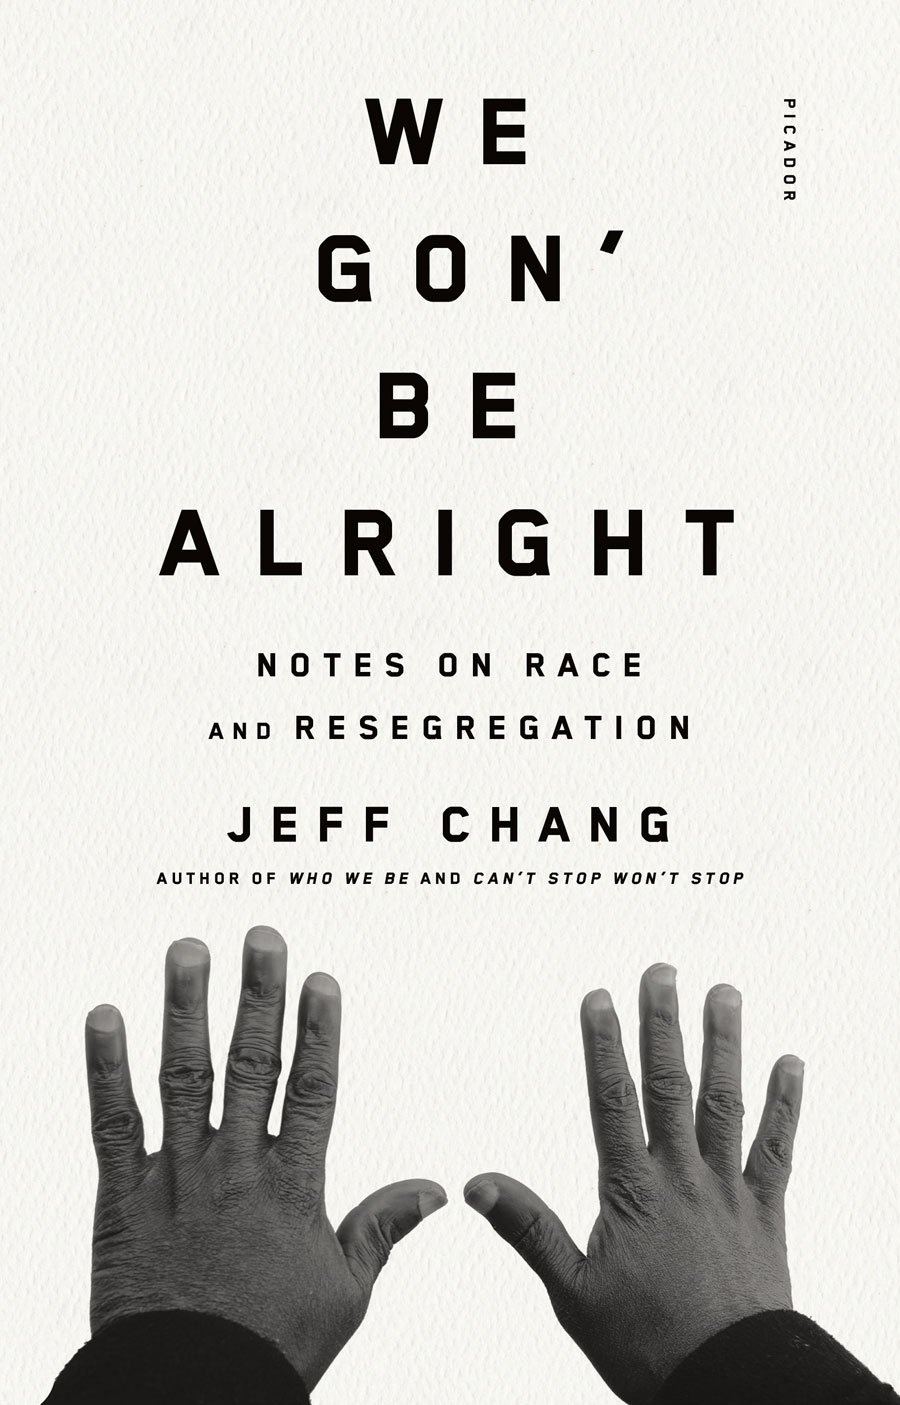 We Gon Be Alright: Notes on Race and Resegregation by Jeff Chang